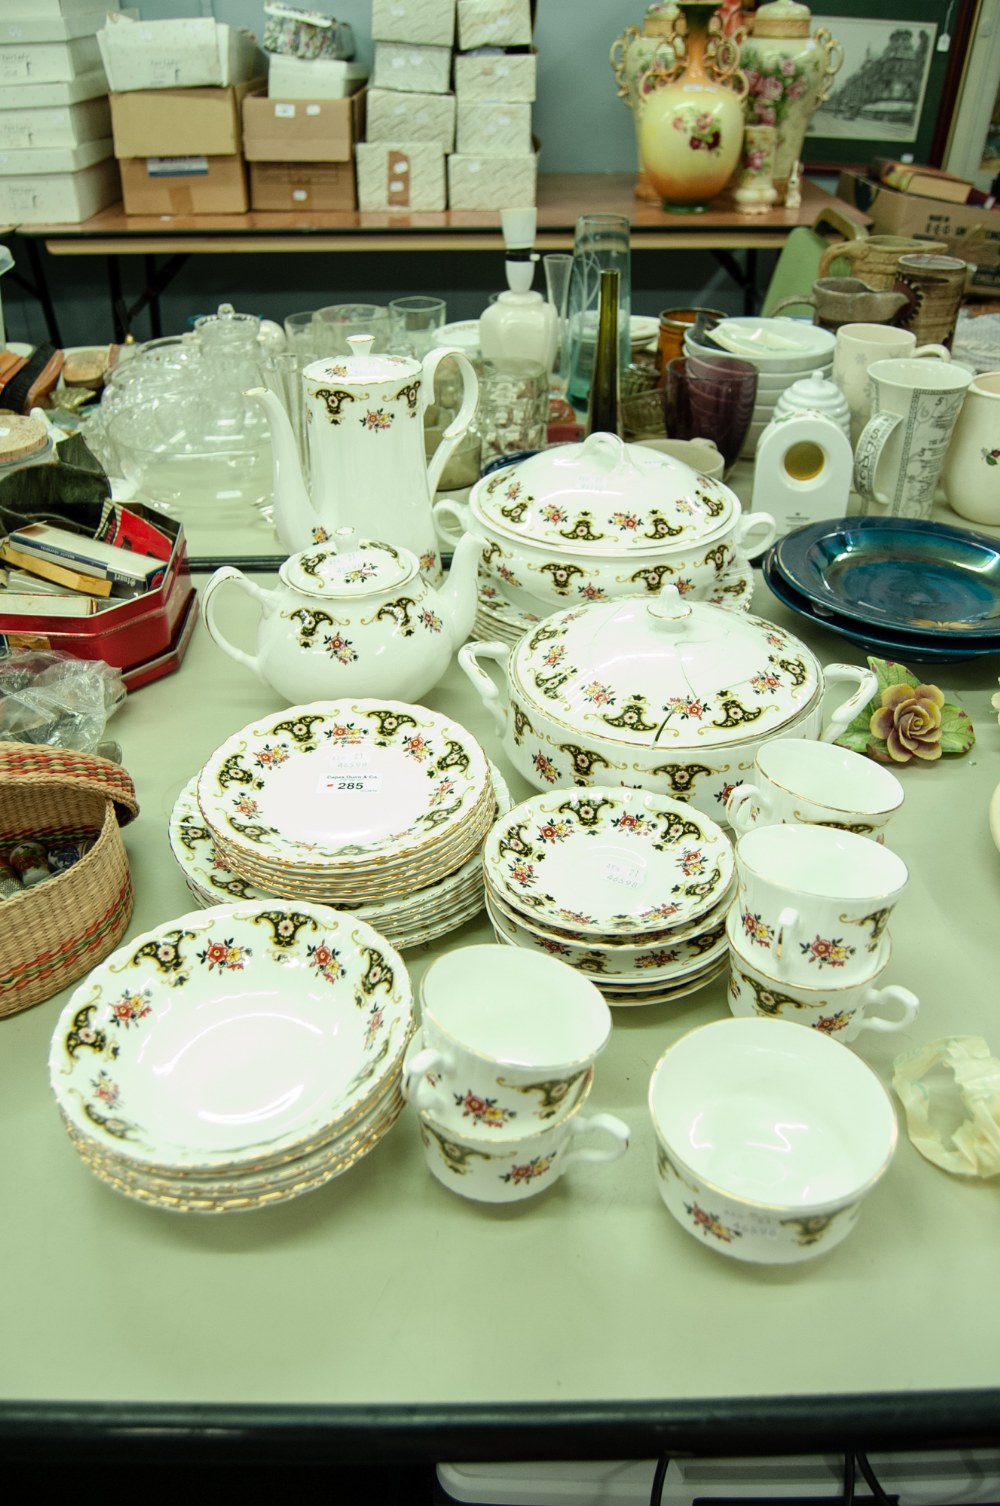 ROYAL STAFFORD 'BALMORAL' DINNER SERVICE SET, APPROXIMATELY 41 PIECES